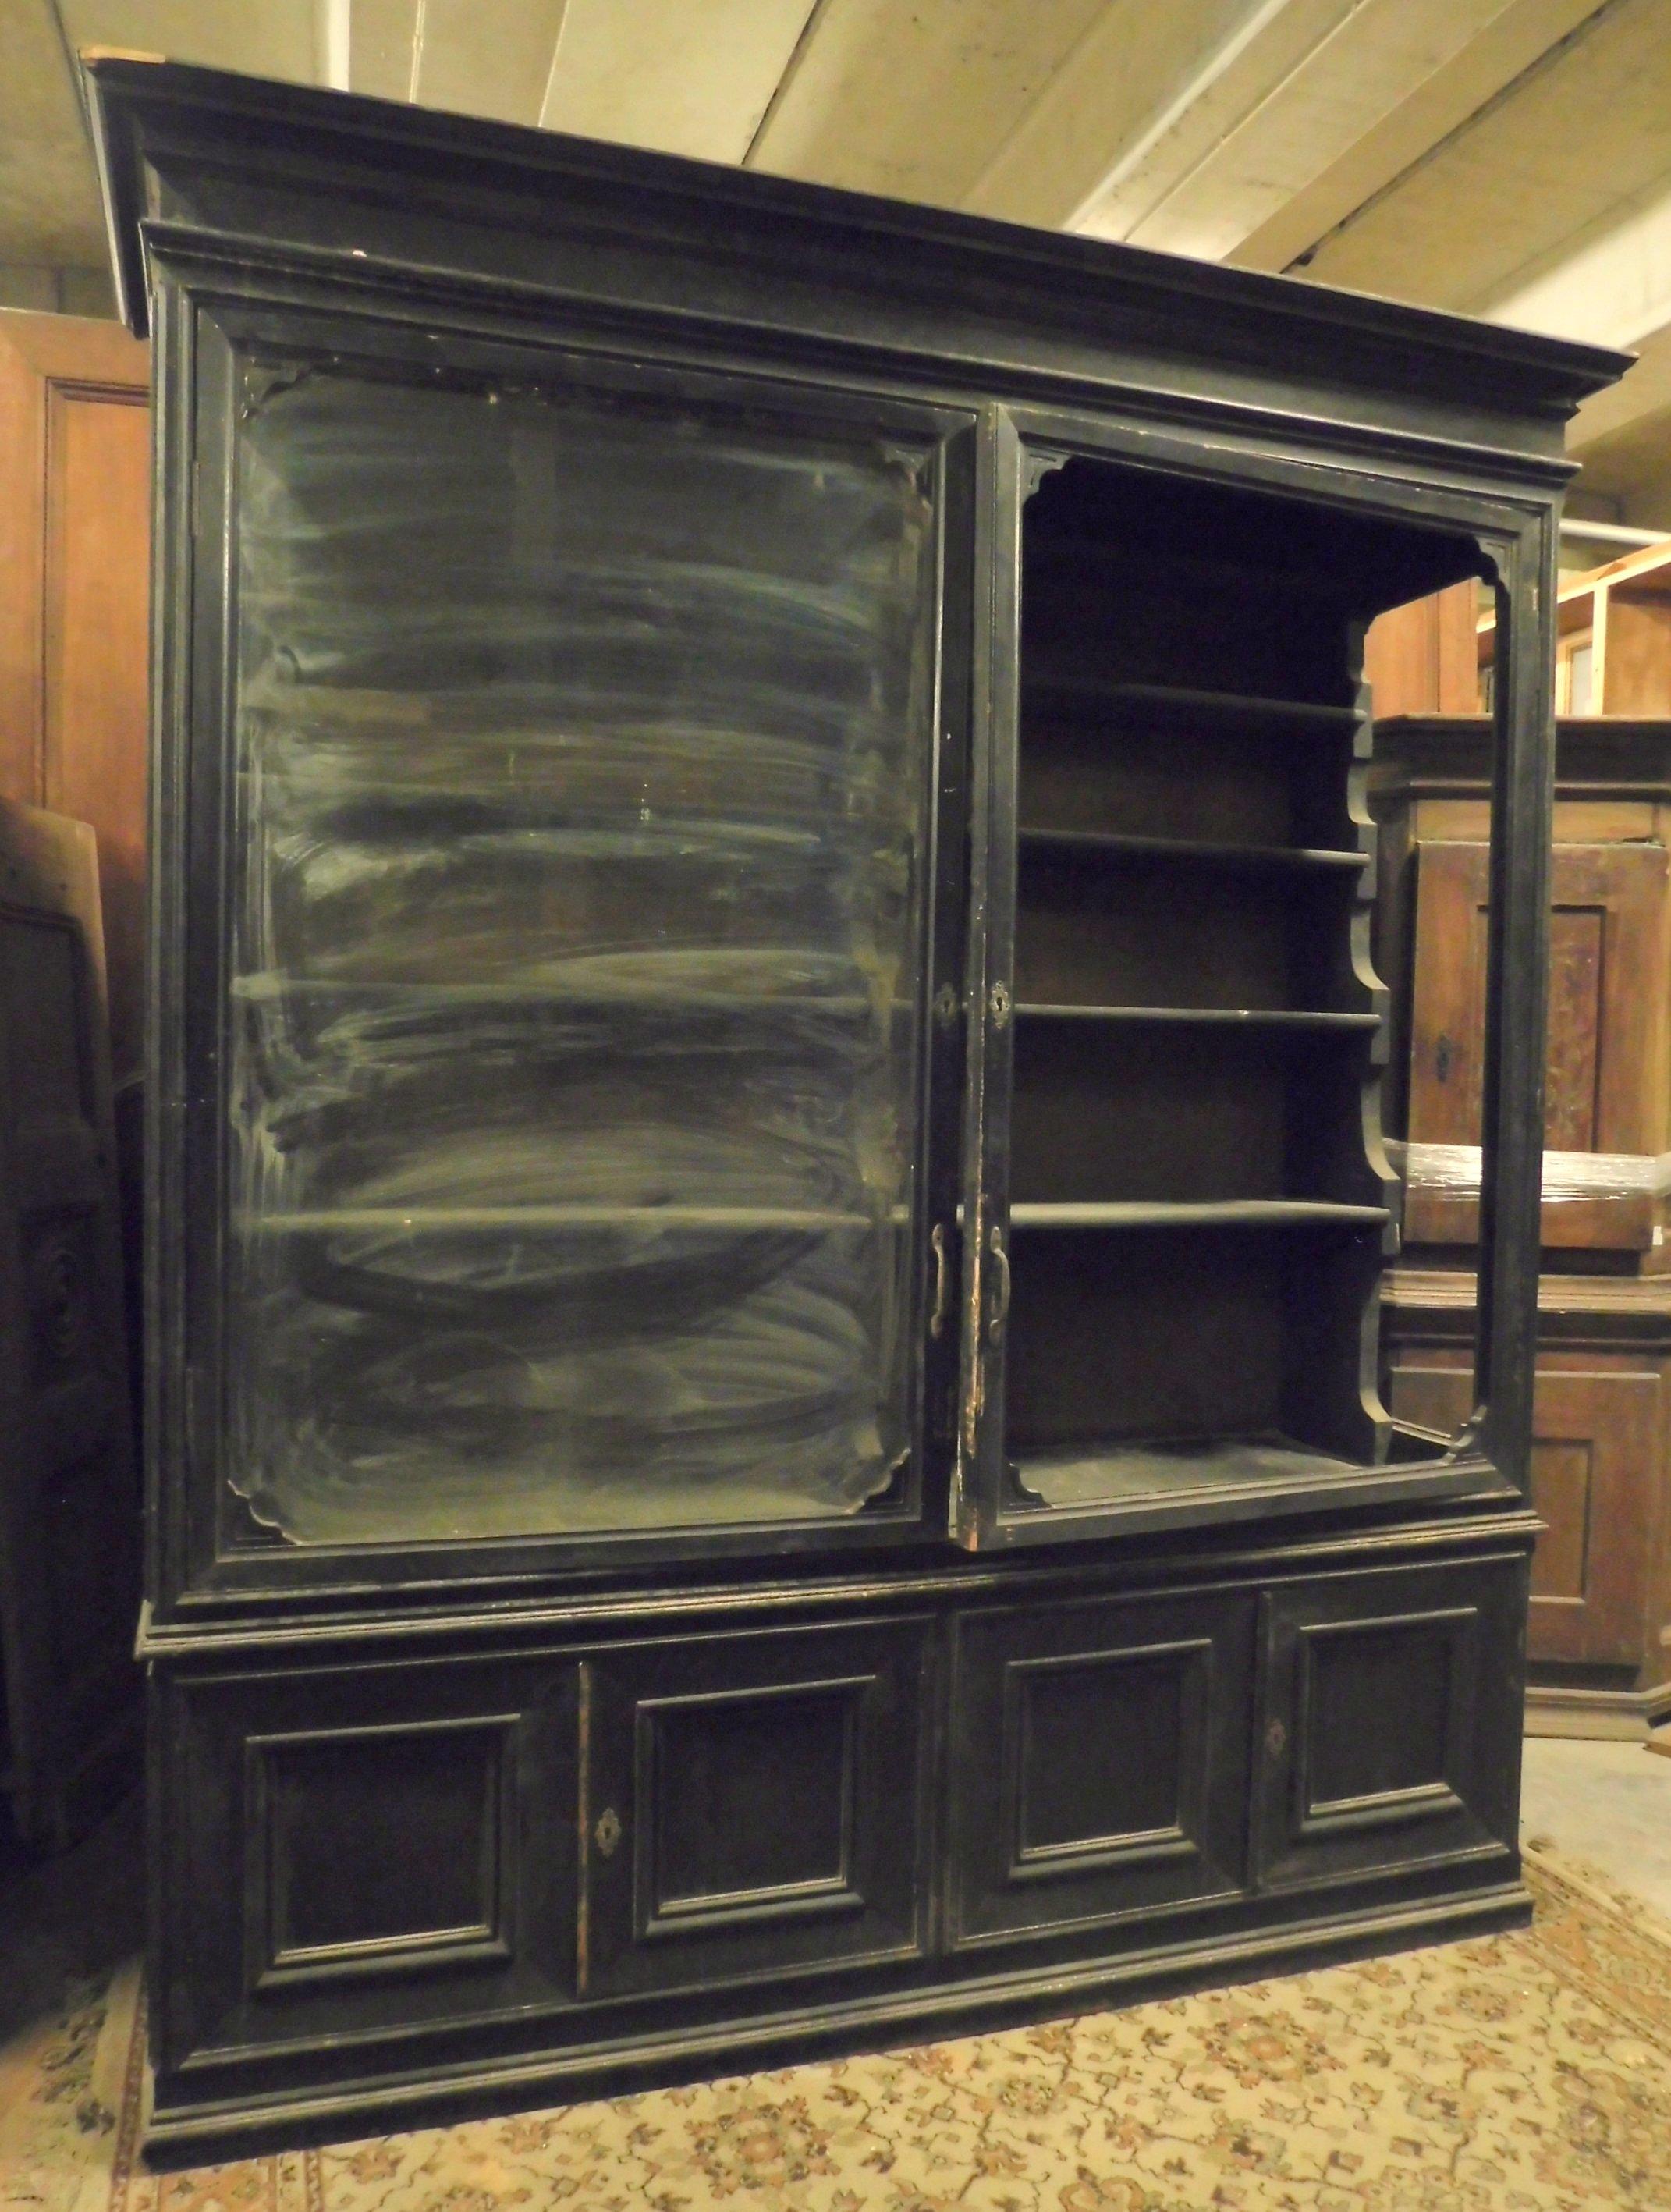 Italian Old Flat Display Cabinet, Lacquered & Glass, to Be Restored, 19th Century, Italy